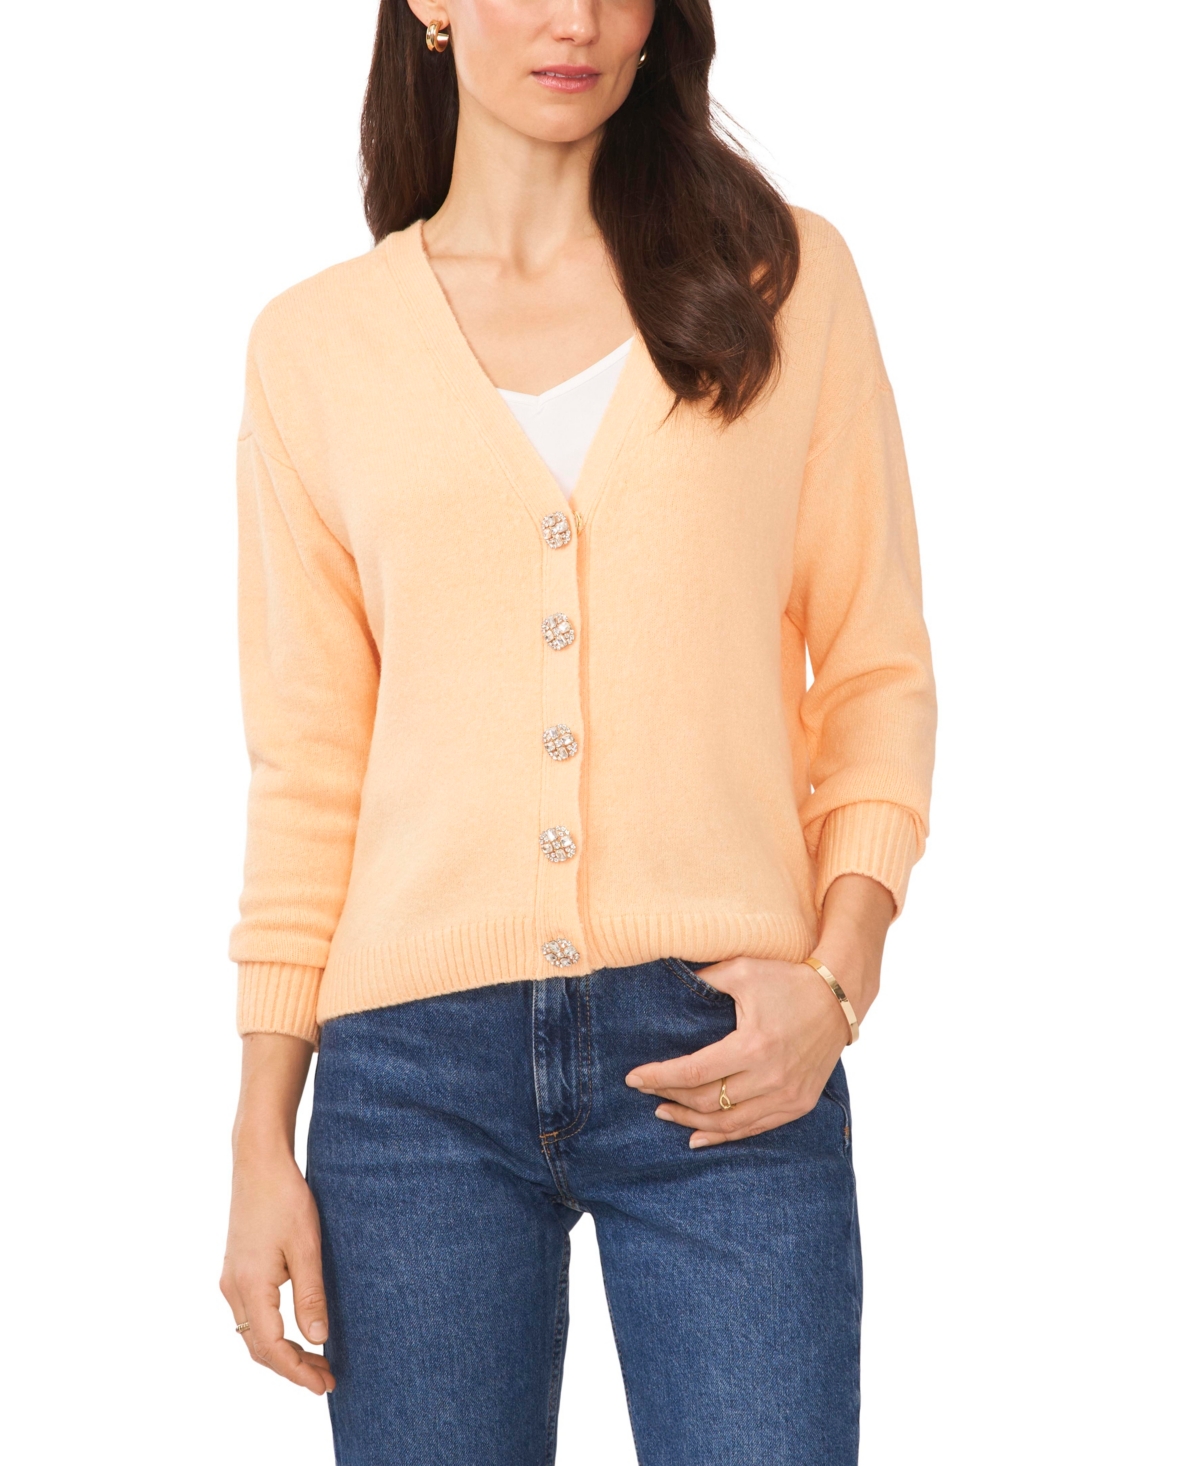 Vince Camuto Women's Button V-neck Sweater